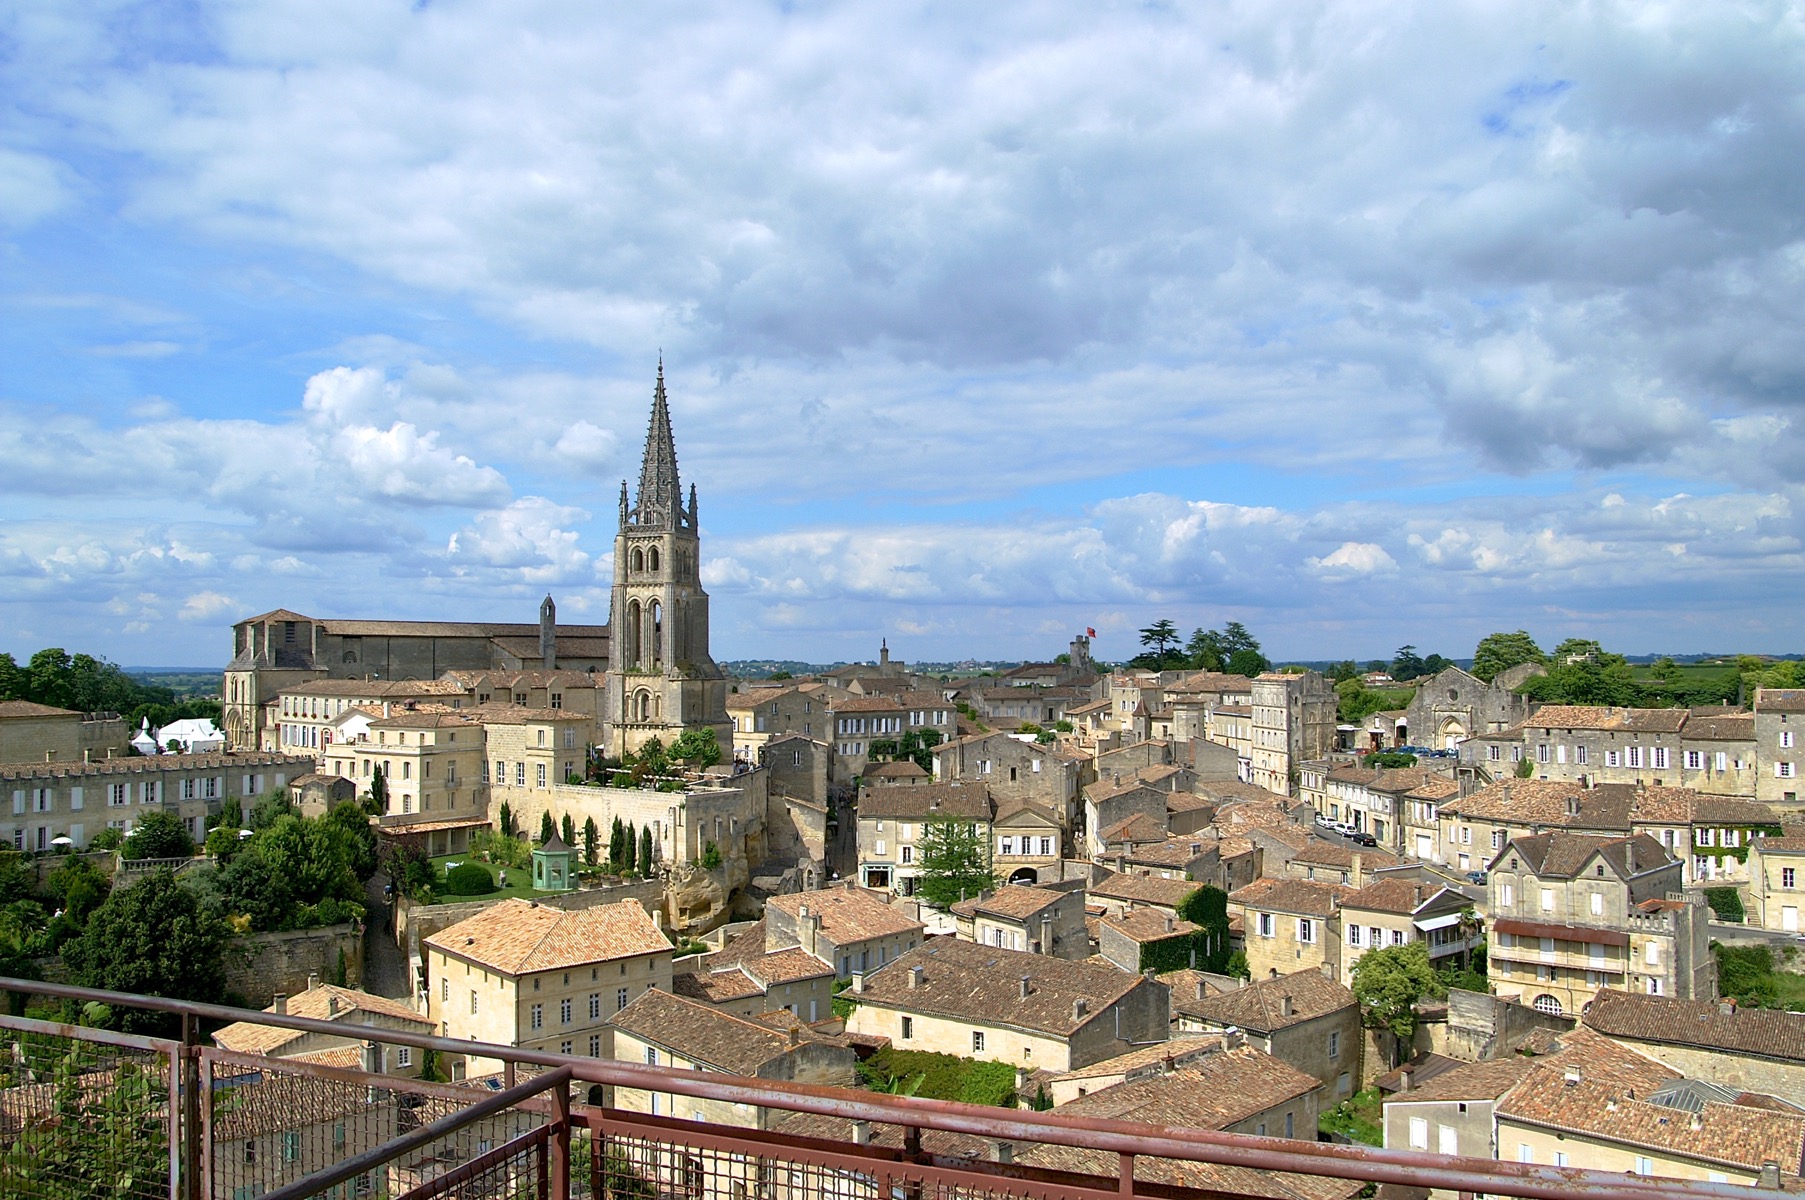 The City seen from the Tour du Roi